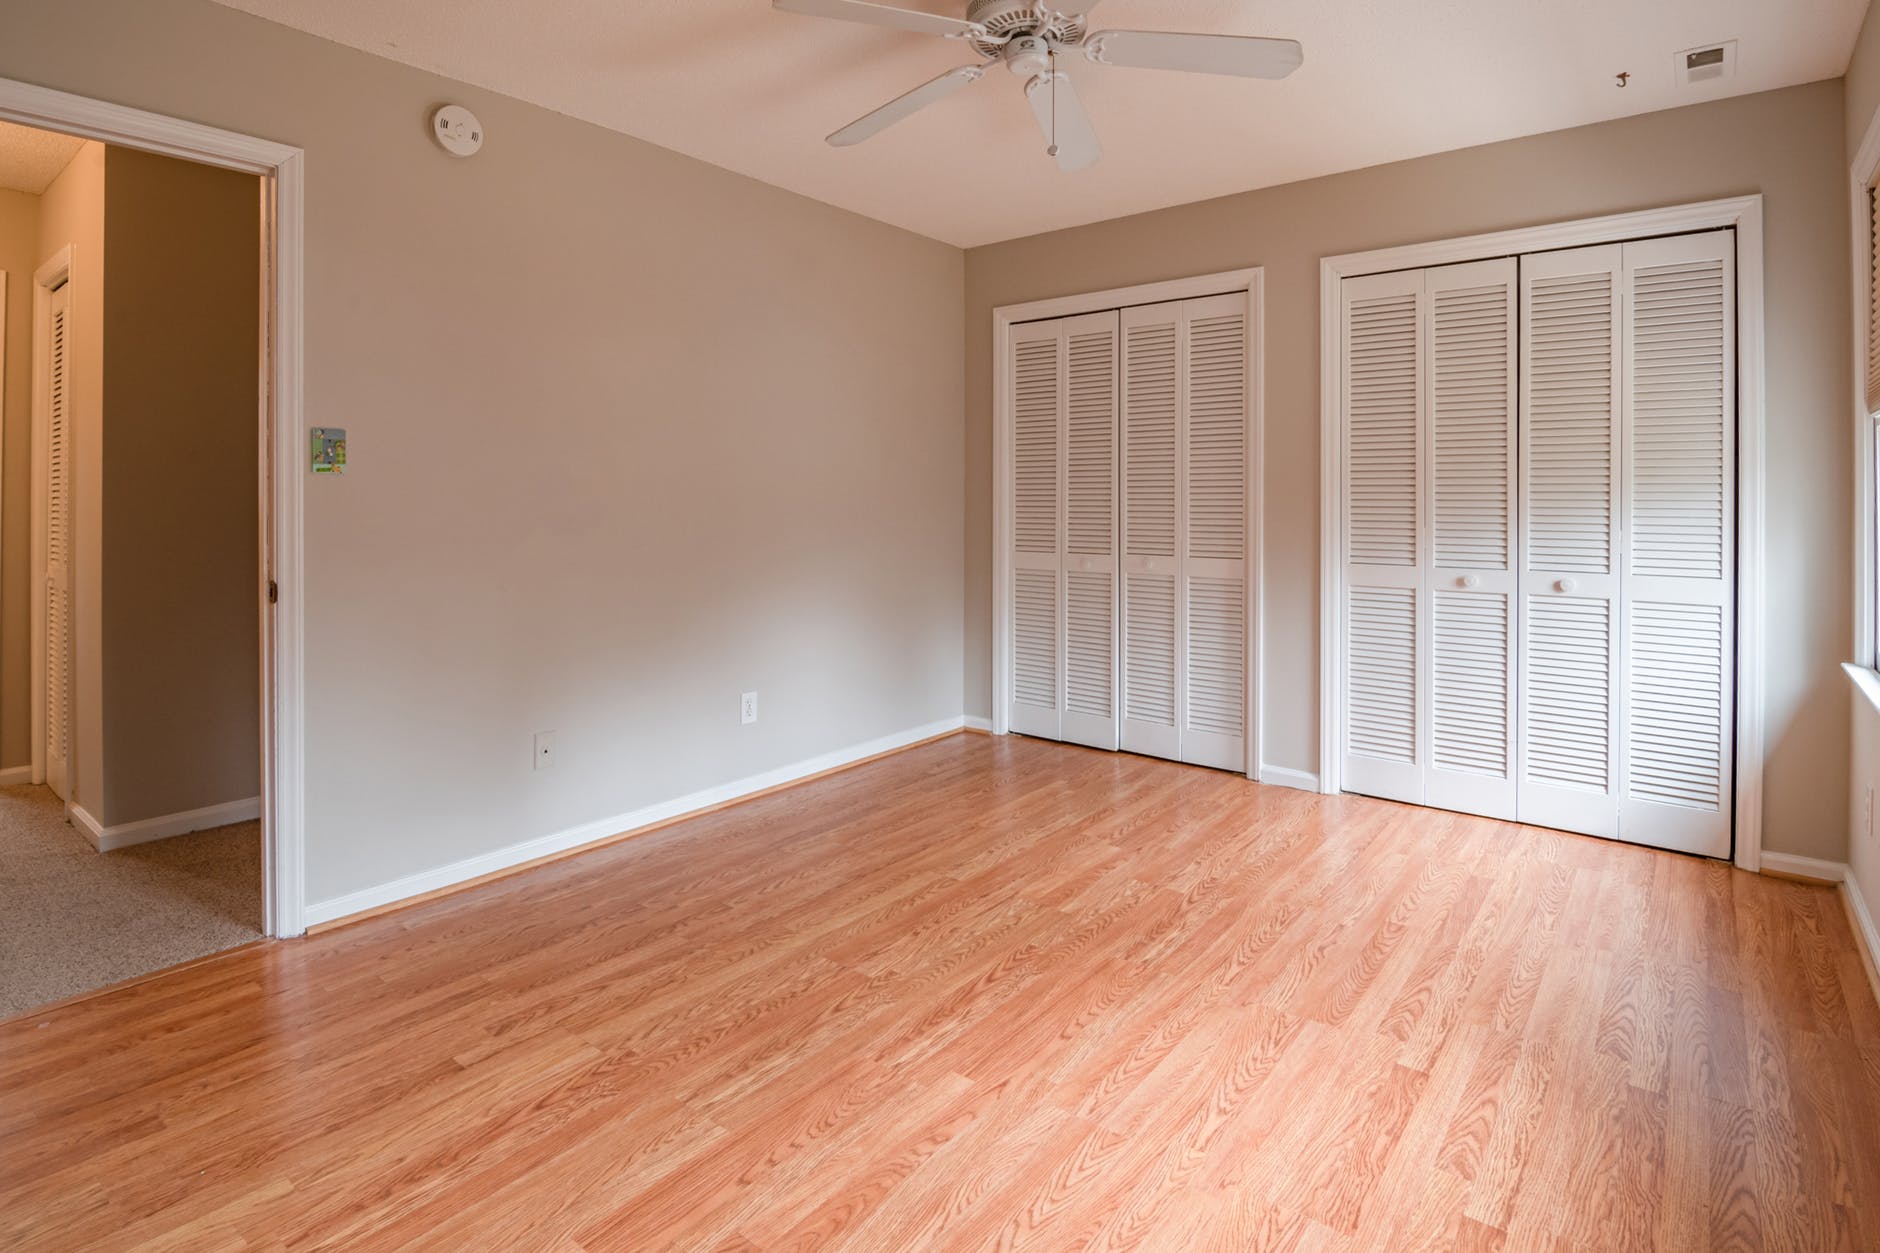 Essential things you should know when refinishing a hardwood floor!